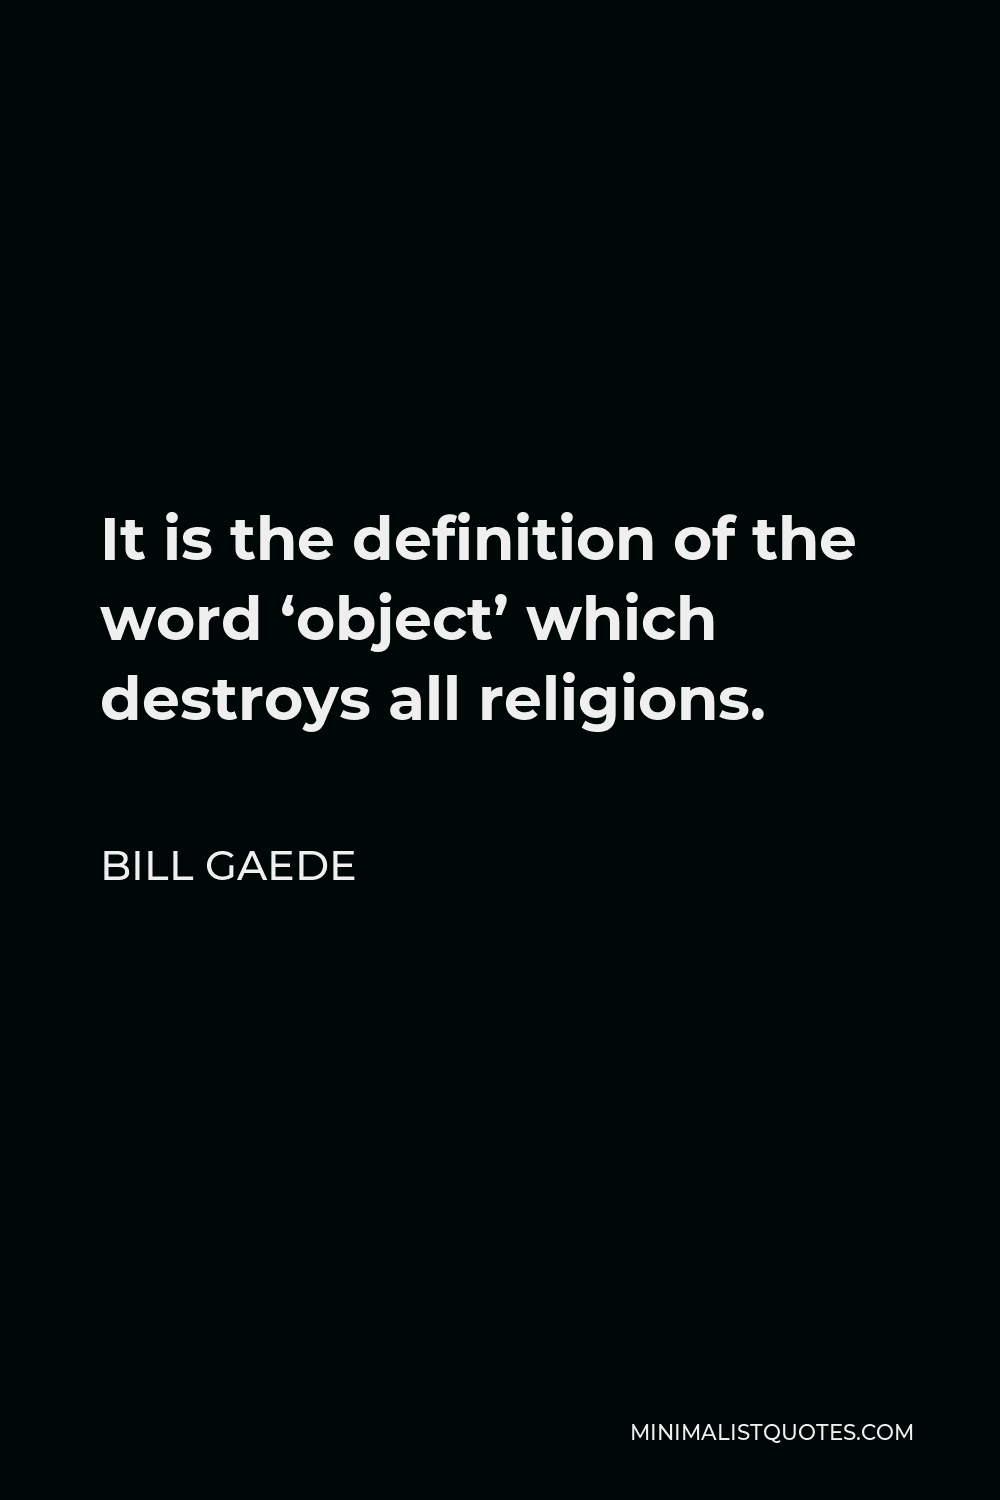 Bill Gaede Quote - It is the definition of the word ‘object’ which destroys all religions.